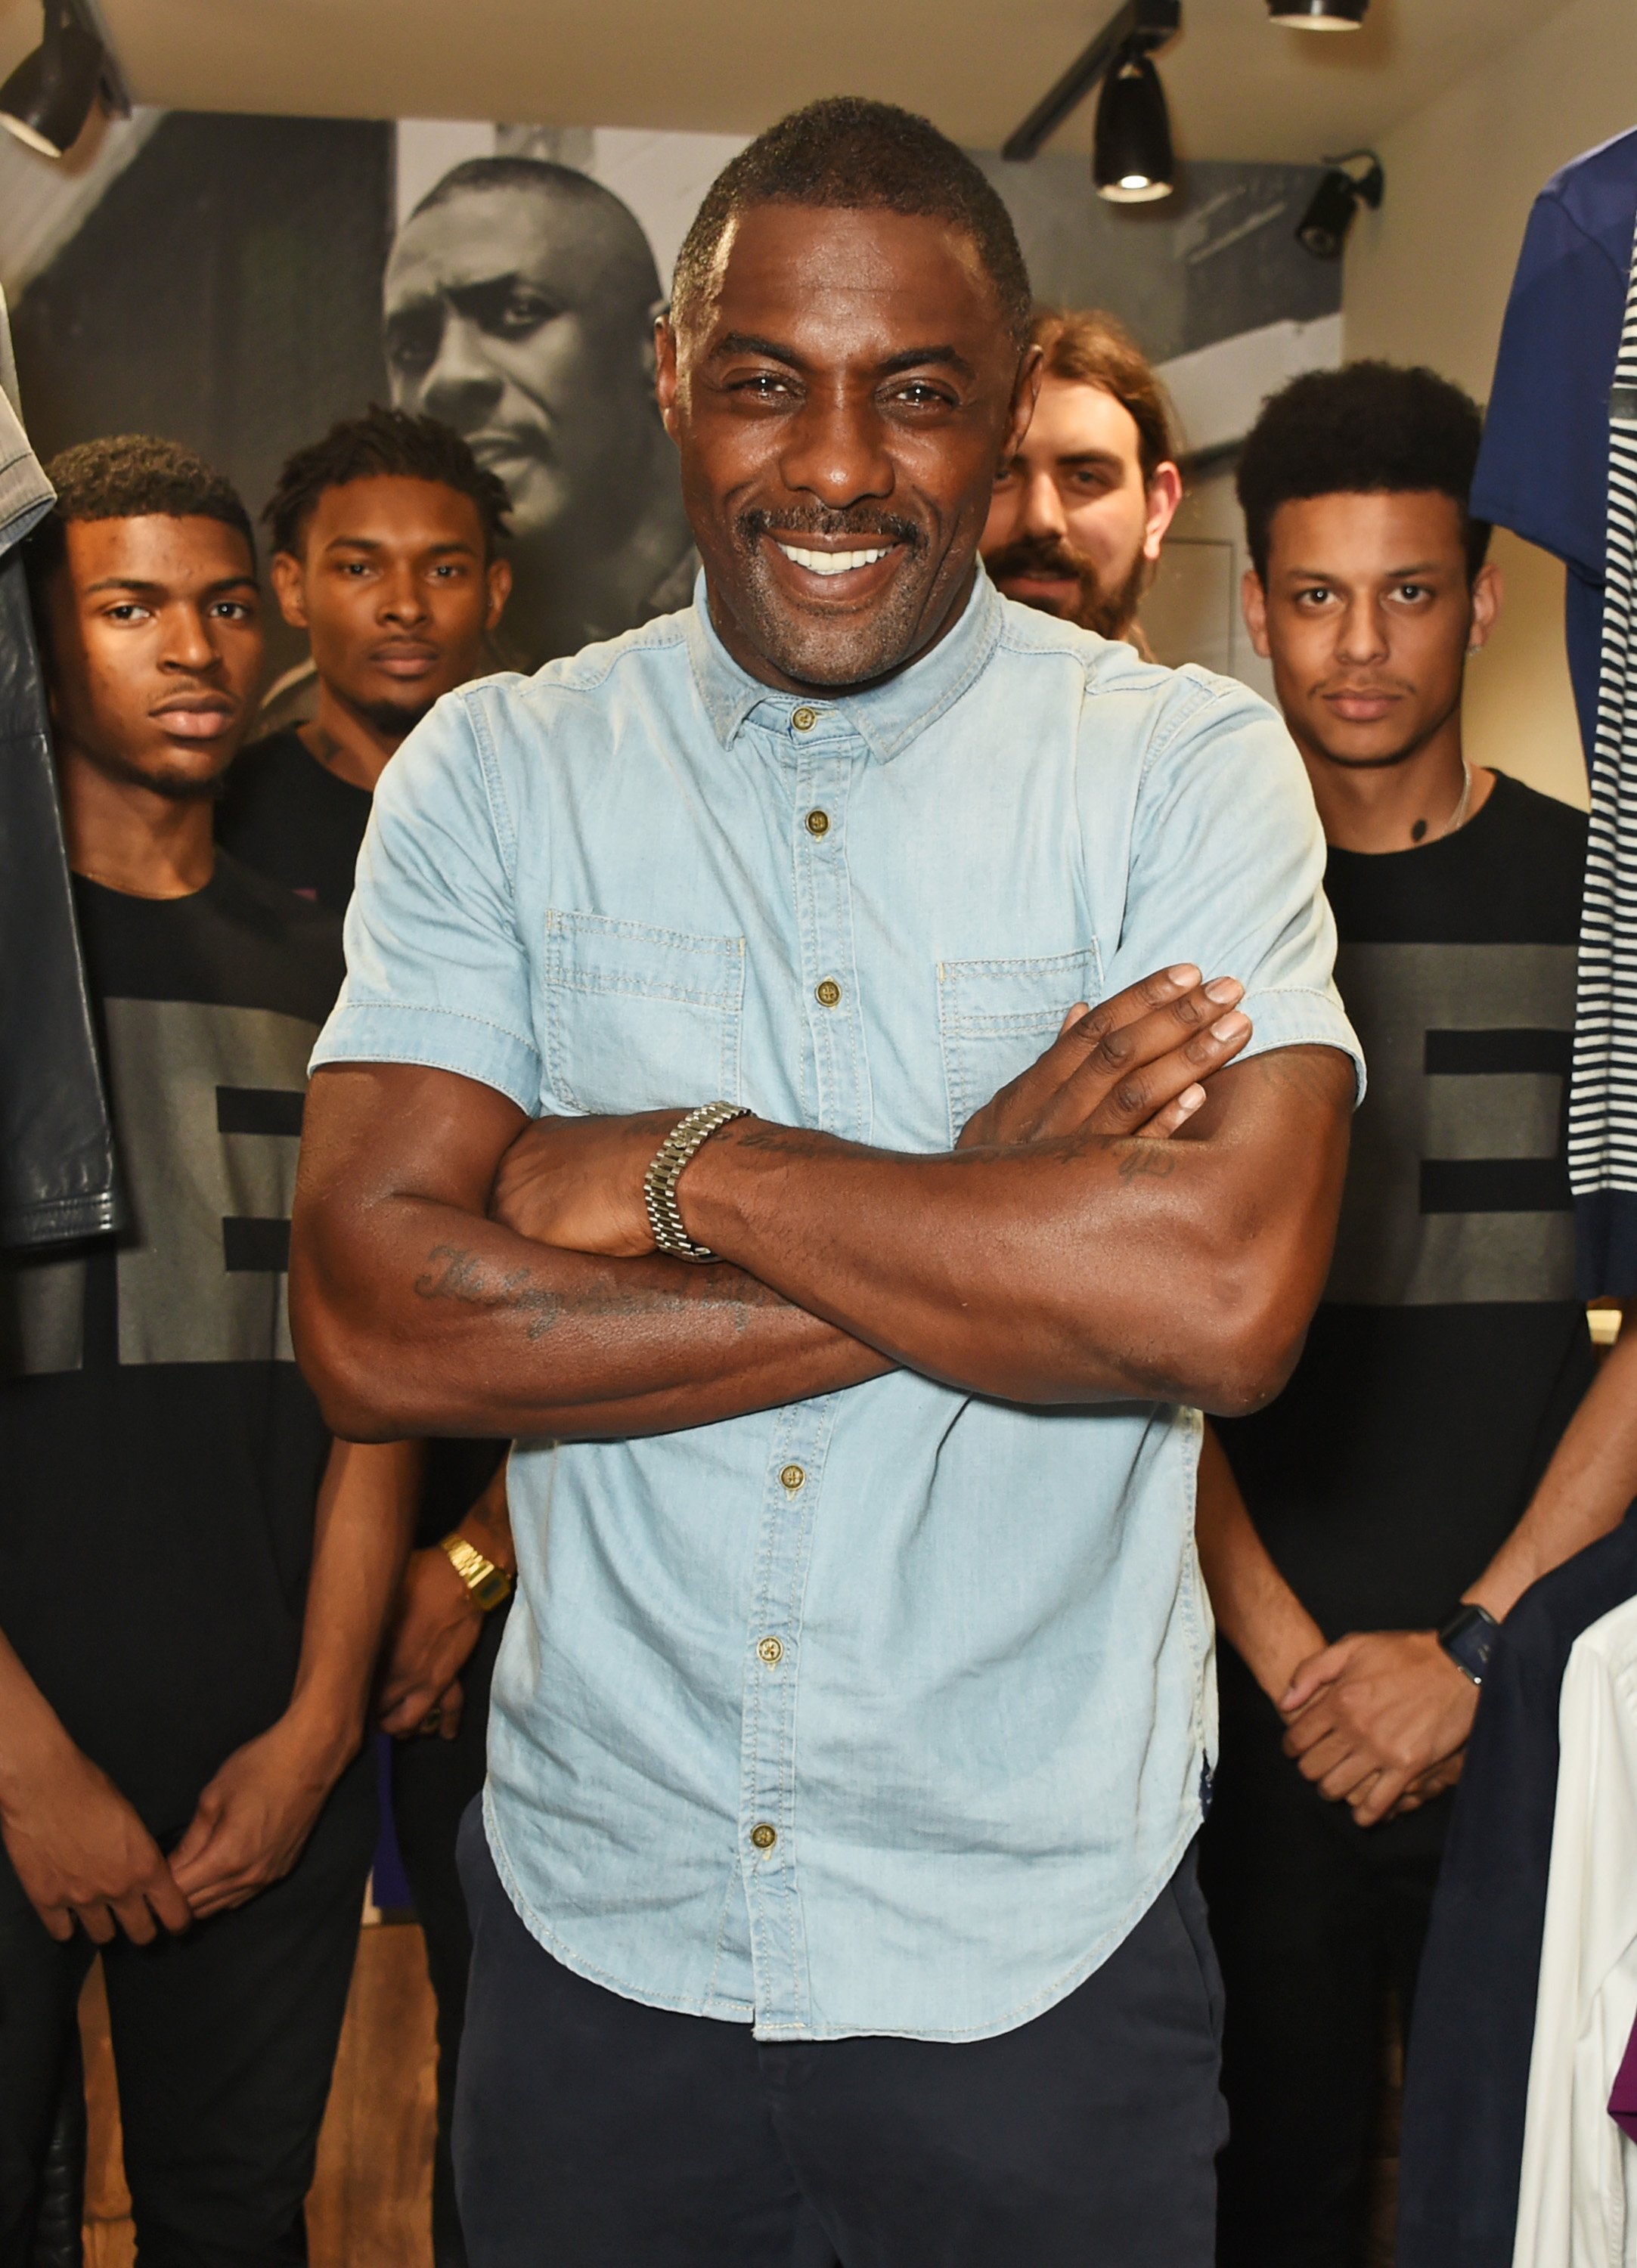 Idris Elba celebrates launch of Boxpark retail space in London, England on August 14, 2016 | Photo: Getty Images